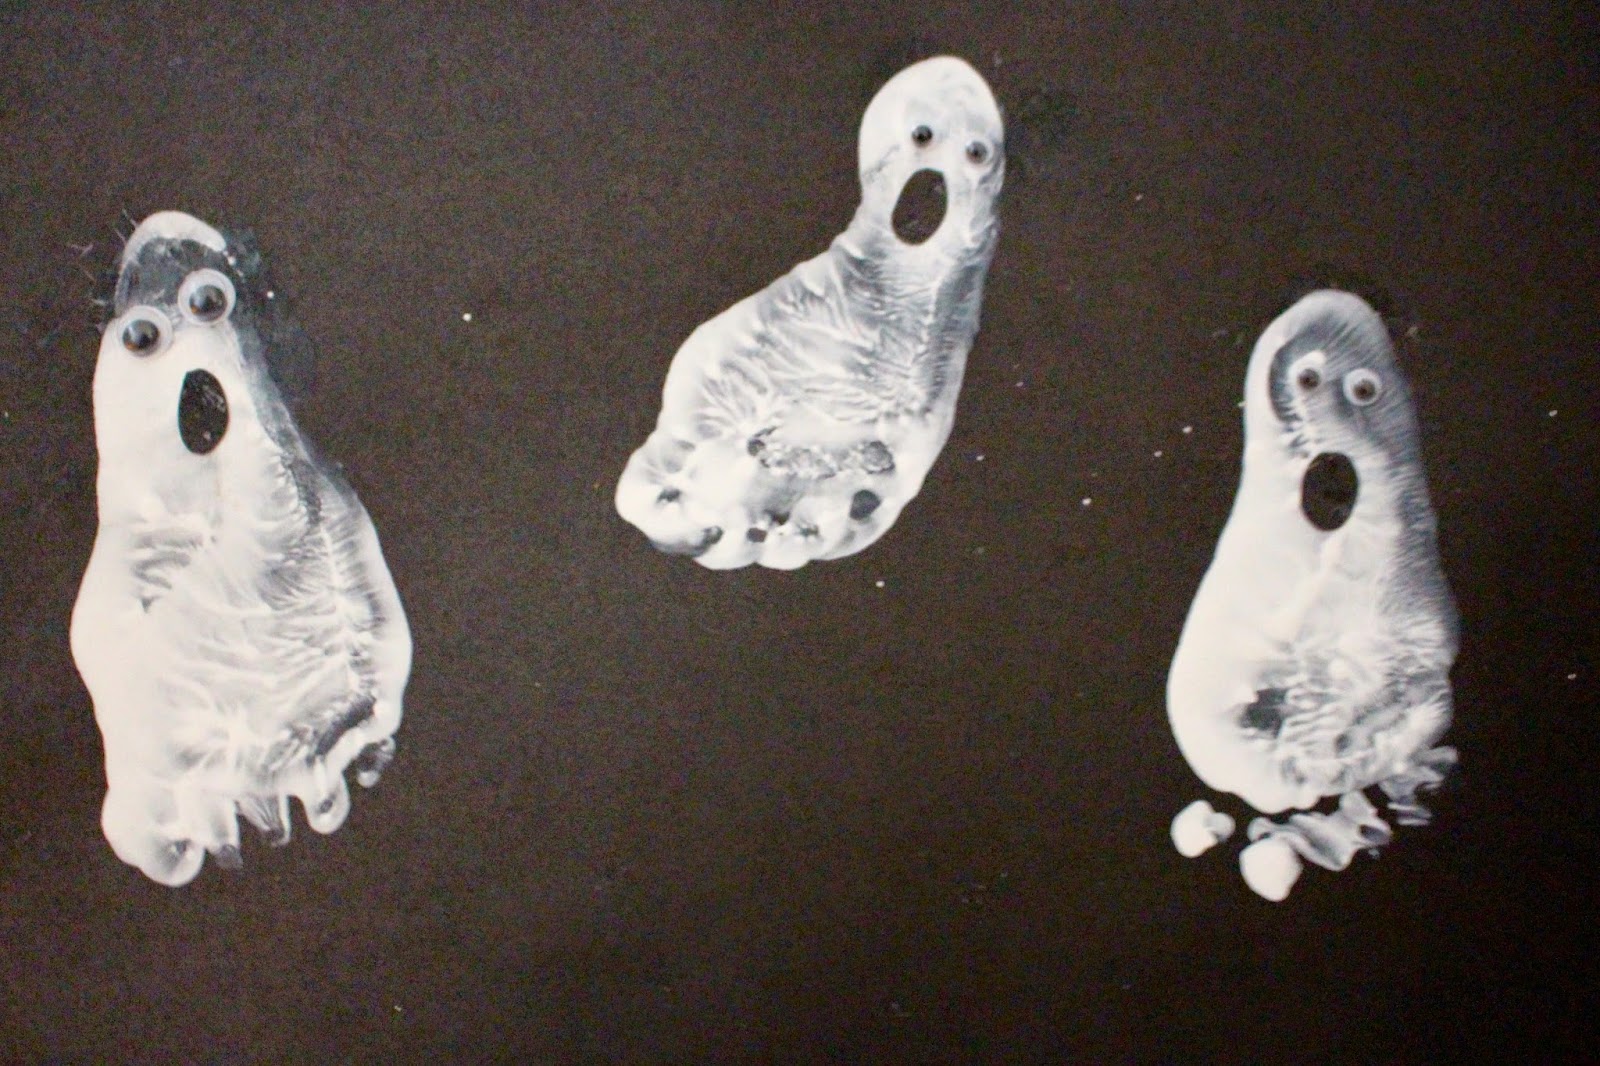 ghost footprint halloween craft for babies, toddlers and preschoolers